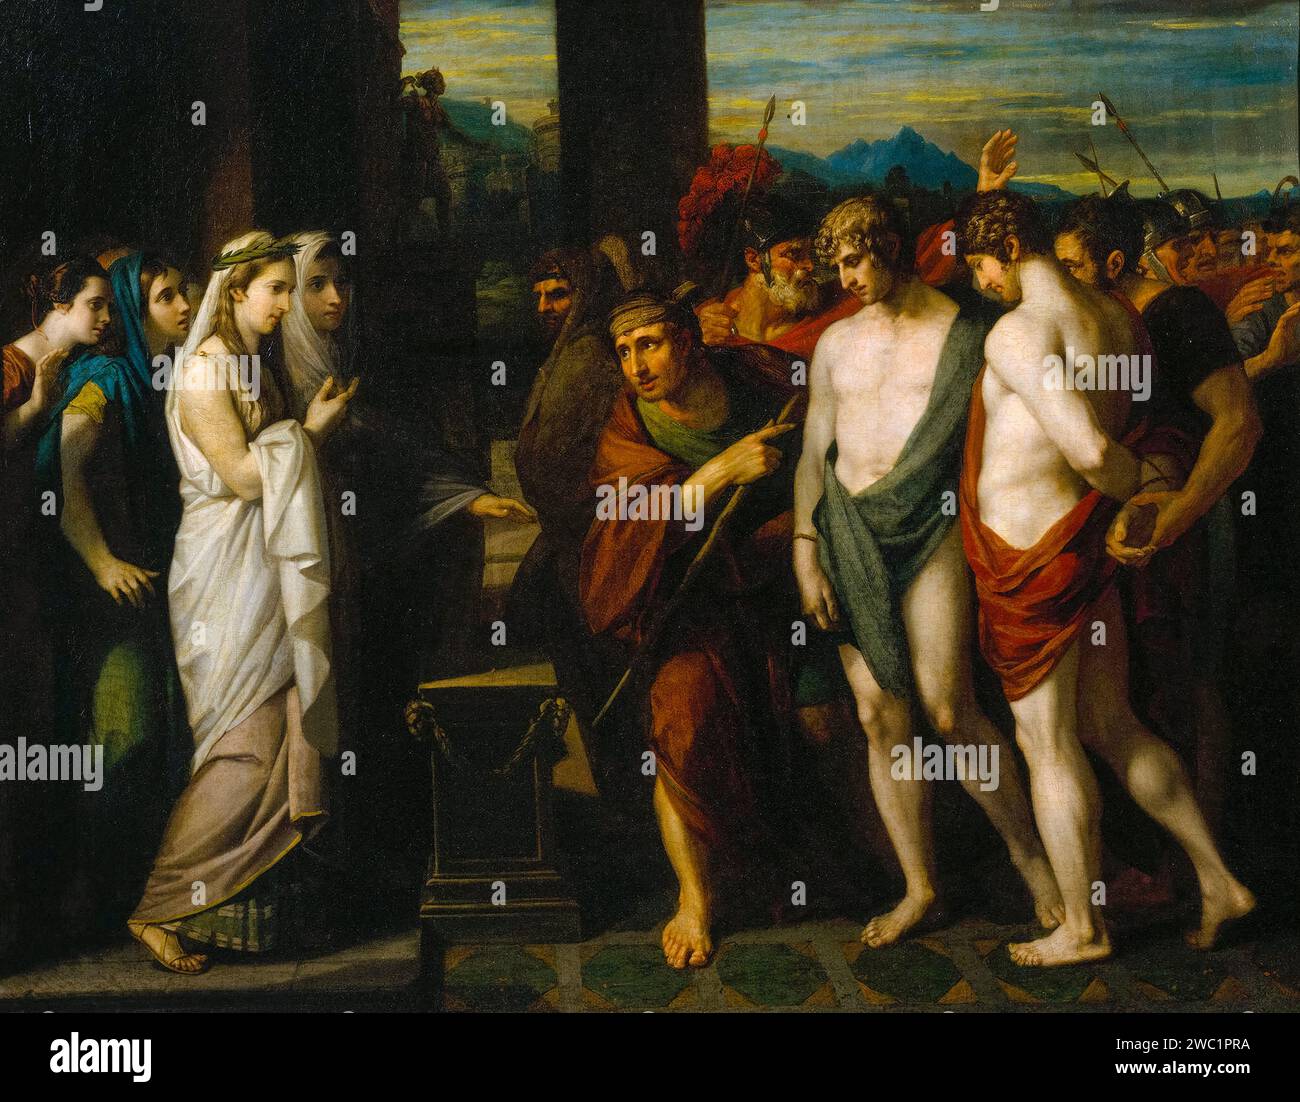 Benjamin West, Pylades and Orestes, Brought as Victims before Iphigenia, painting in oil on canvas, 1766 Stock Photo